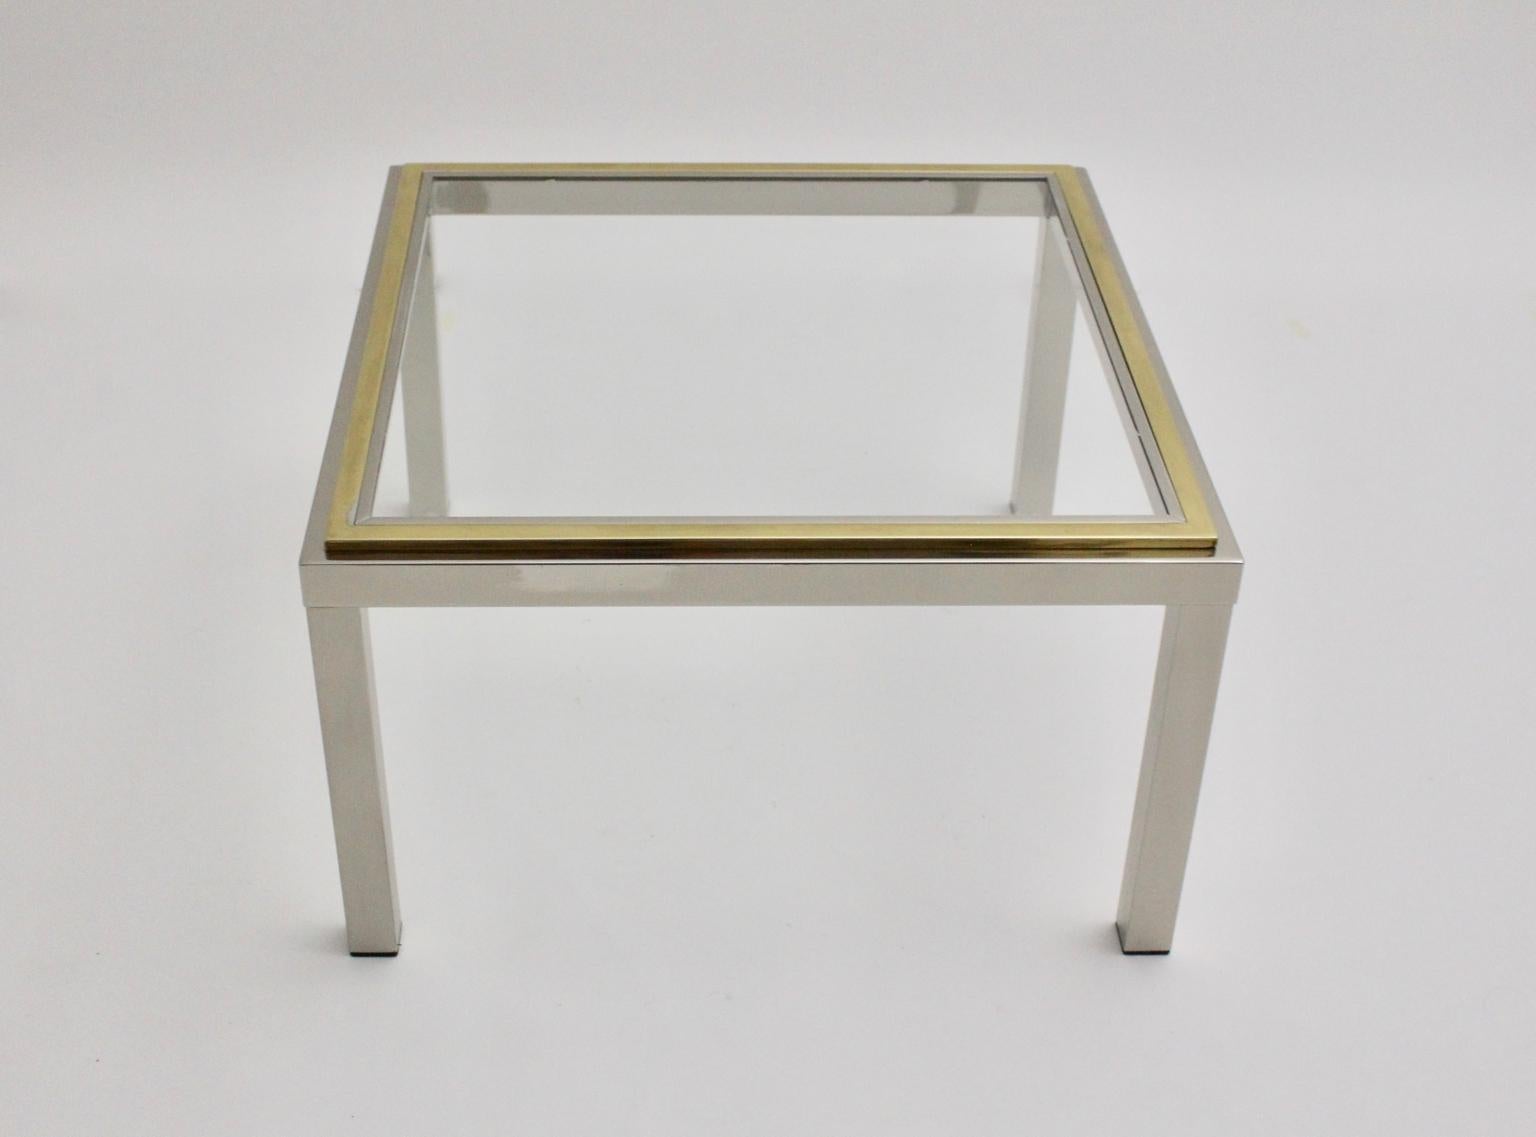 This presented square coffee table by Willy Rizzo attributed shows a chromed and gilt metal table frame with a clear glass top, Italy 1970s.

Willy Rizzo (1928 - 2013) photograph and designer icon.
His designs are similar to Romeo Rega and Gabriella